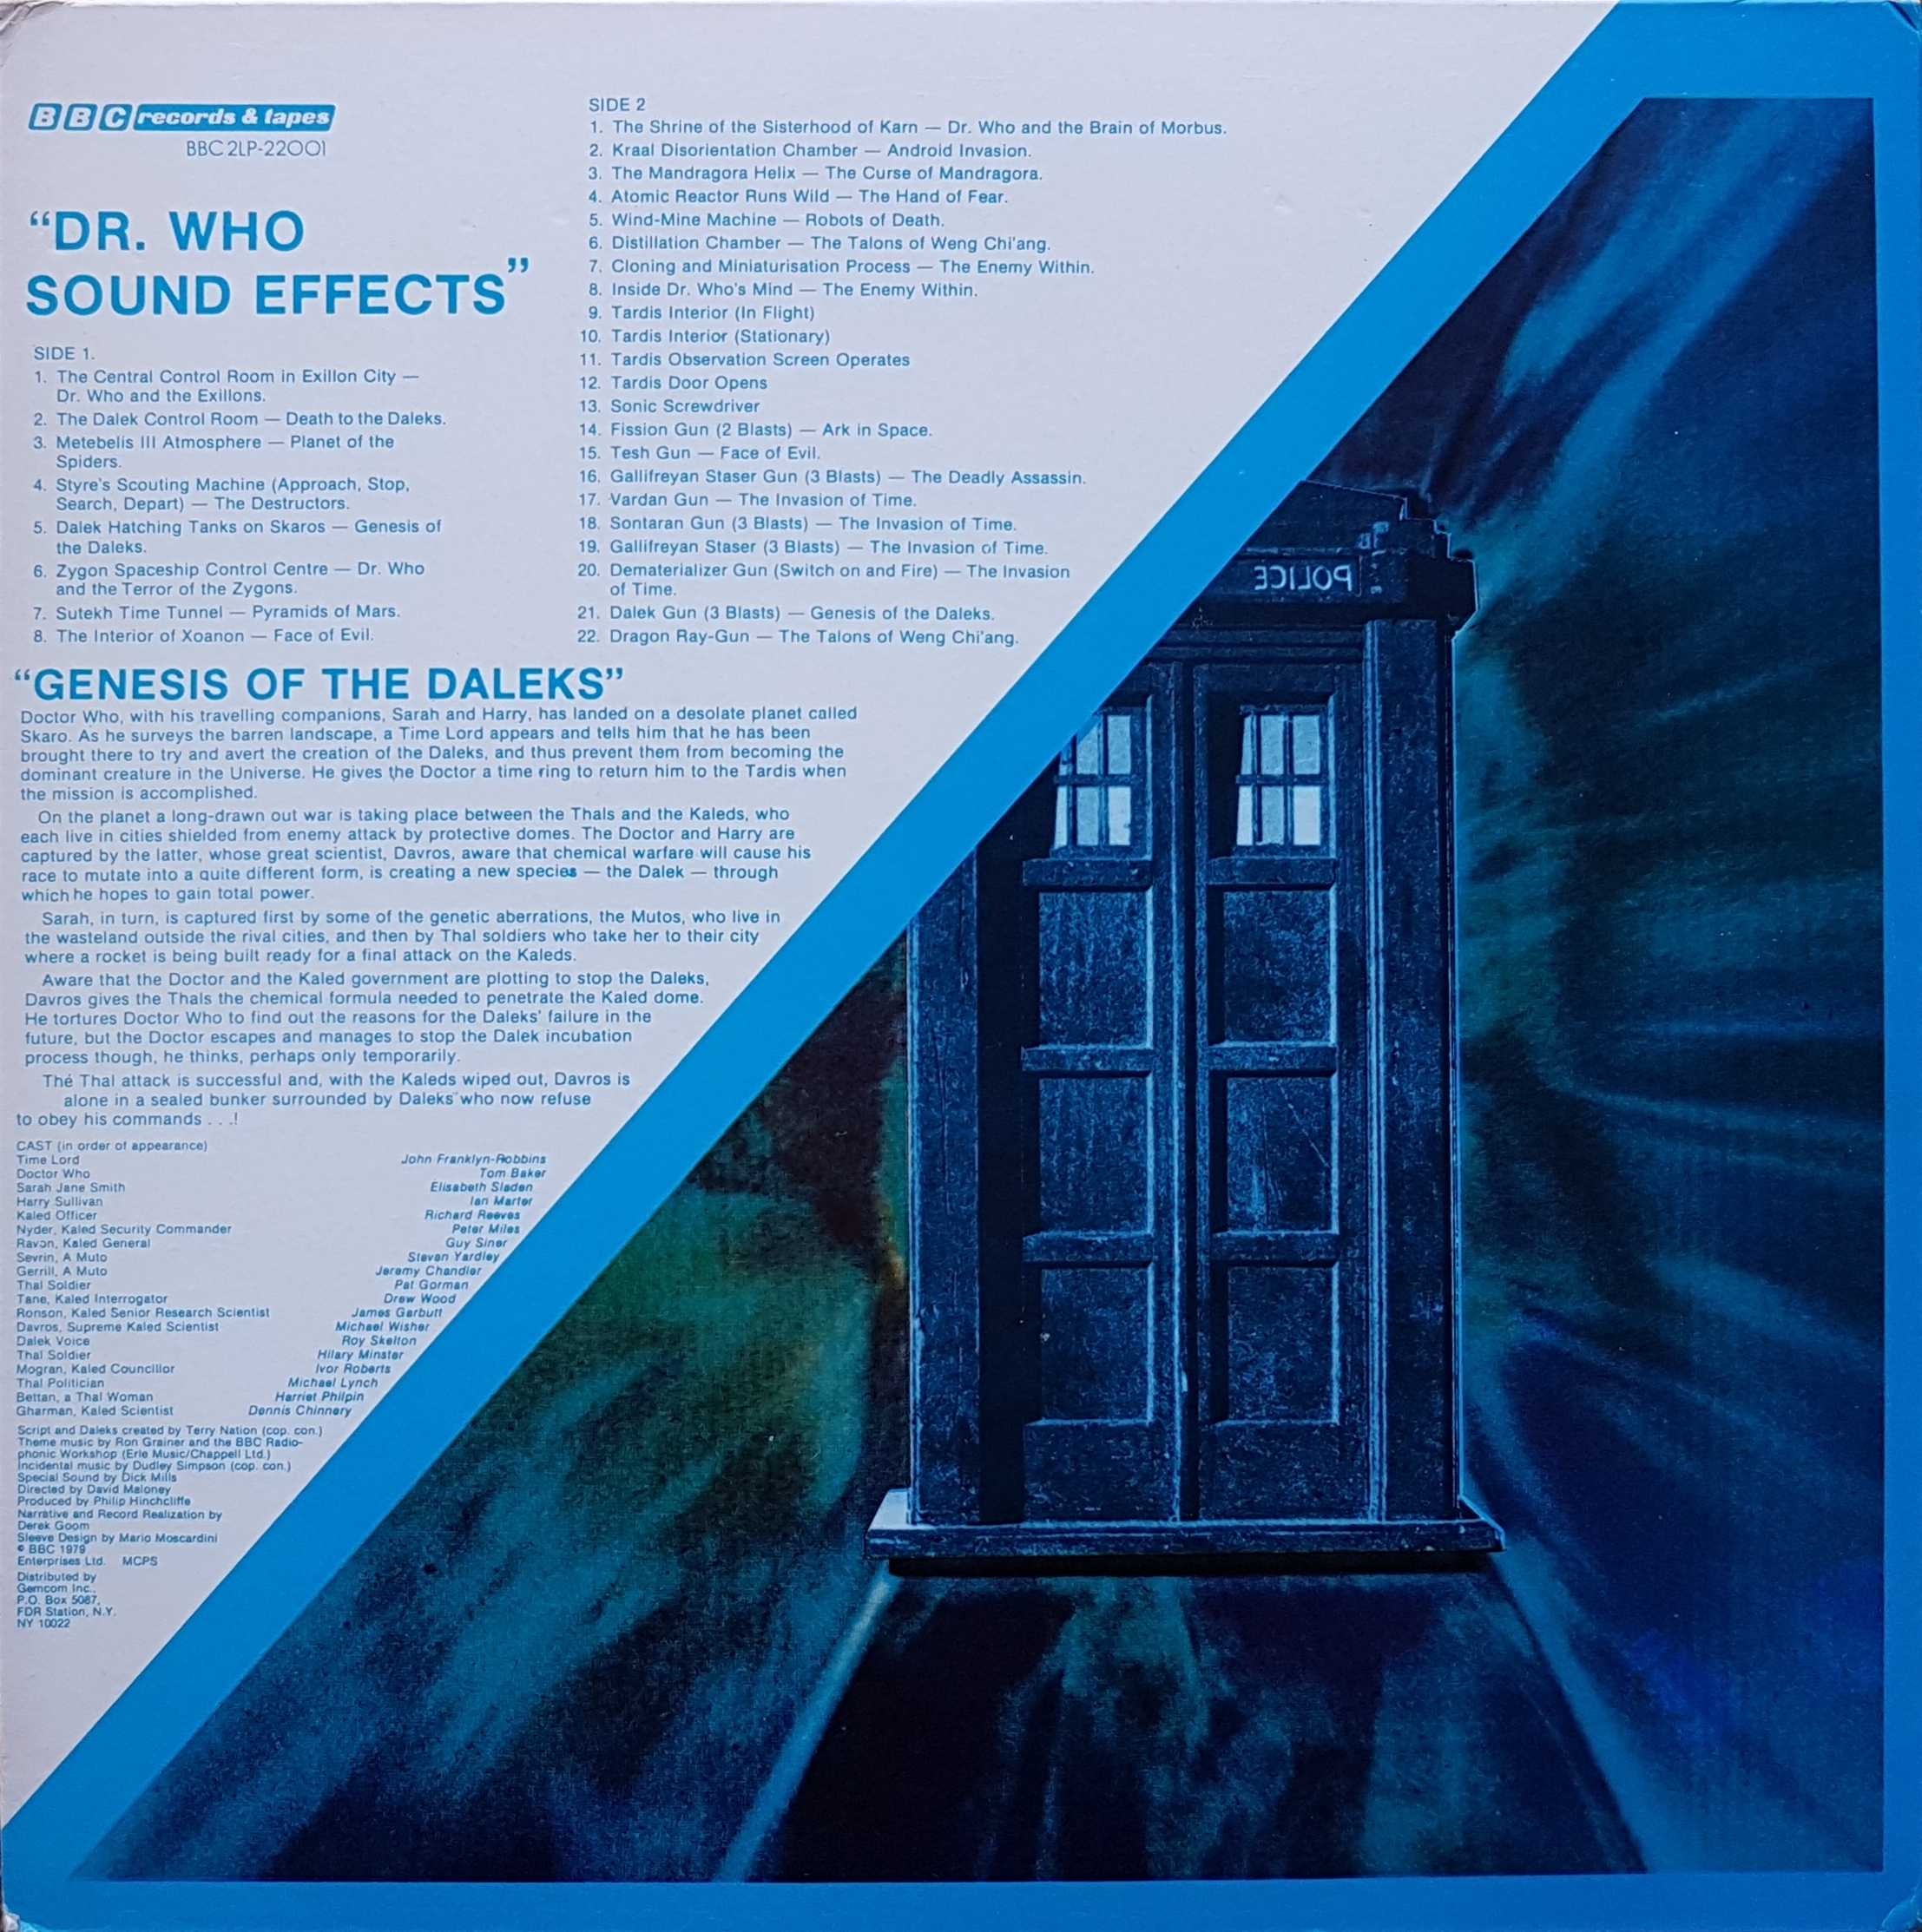 Picture of BBC2LP-22001 Doctor Who - Collectors edition by artist Various from the BBC records and Tapes library